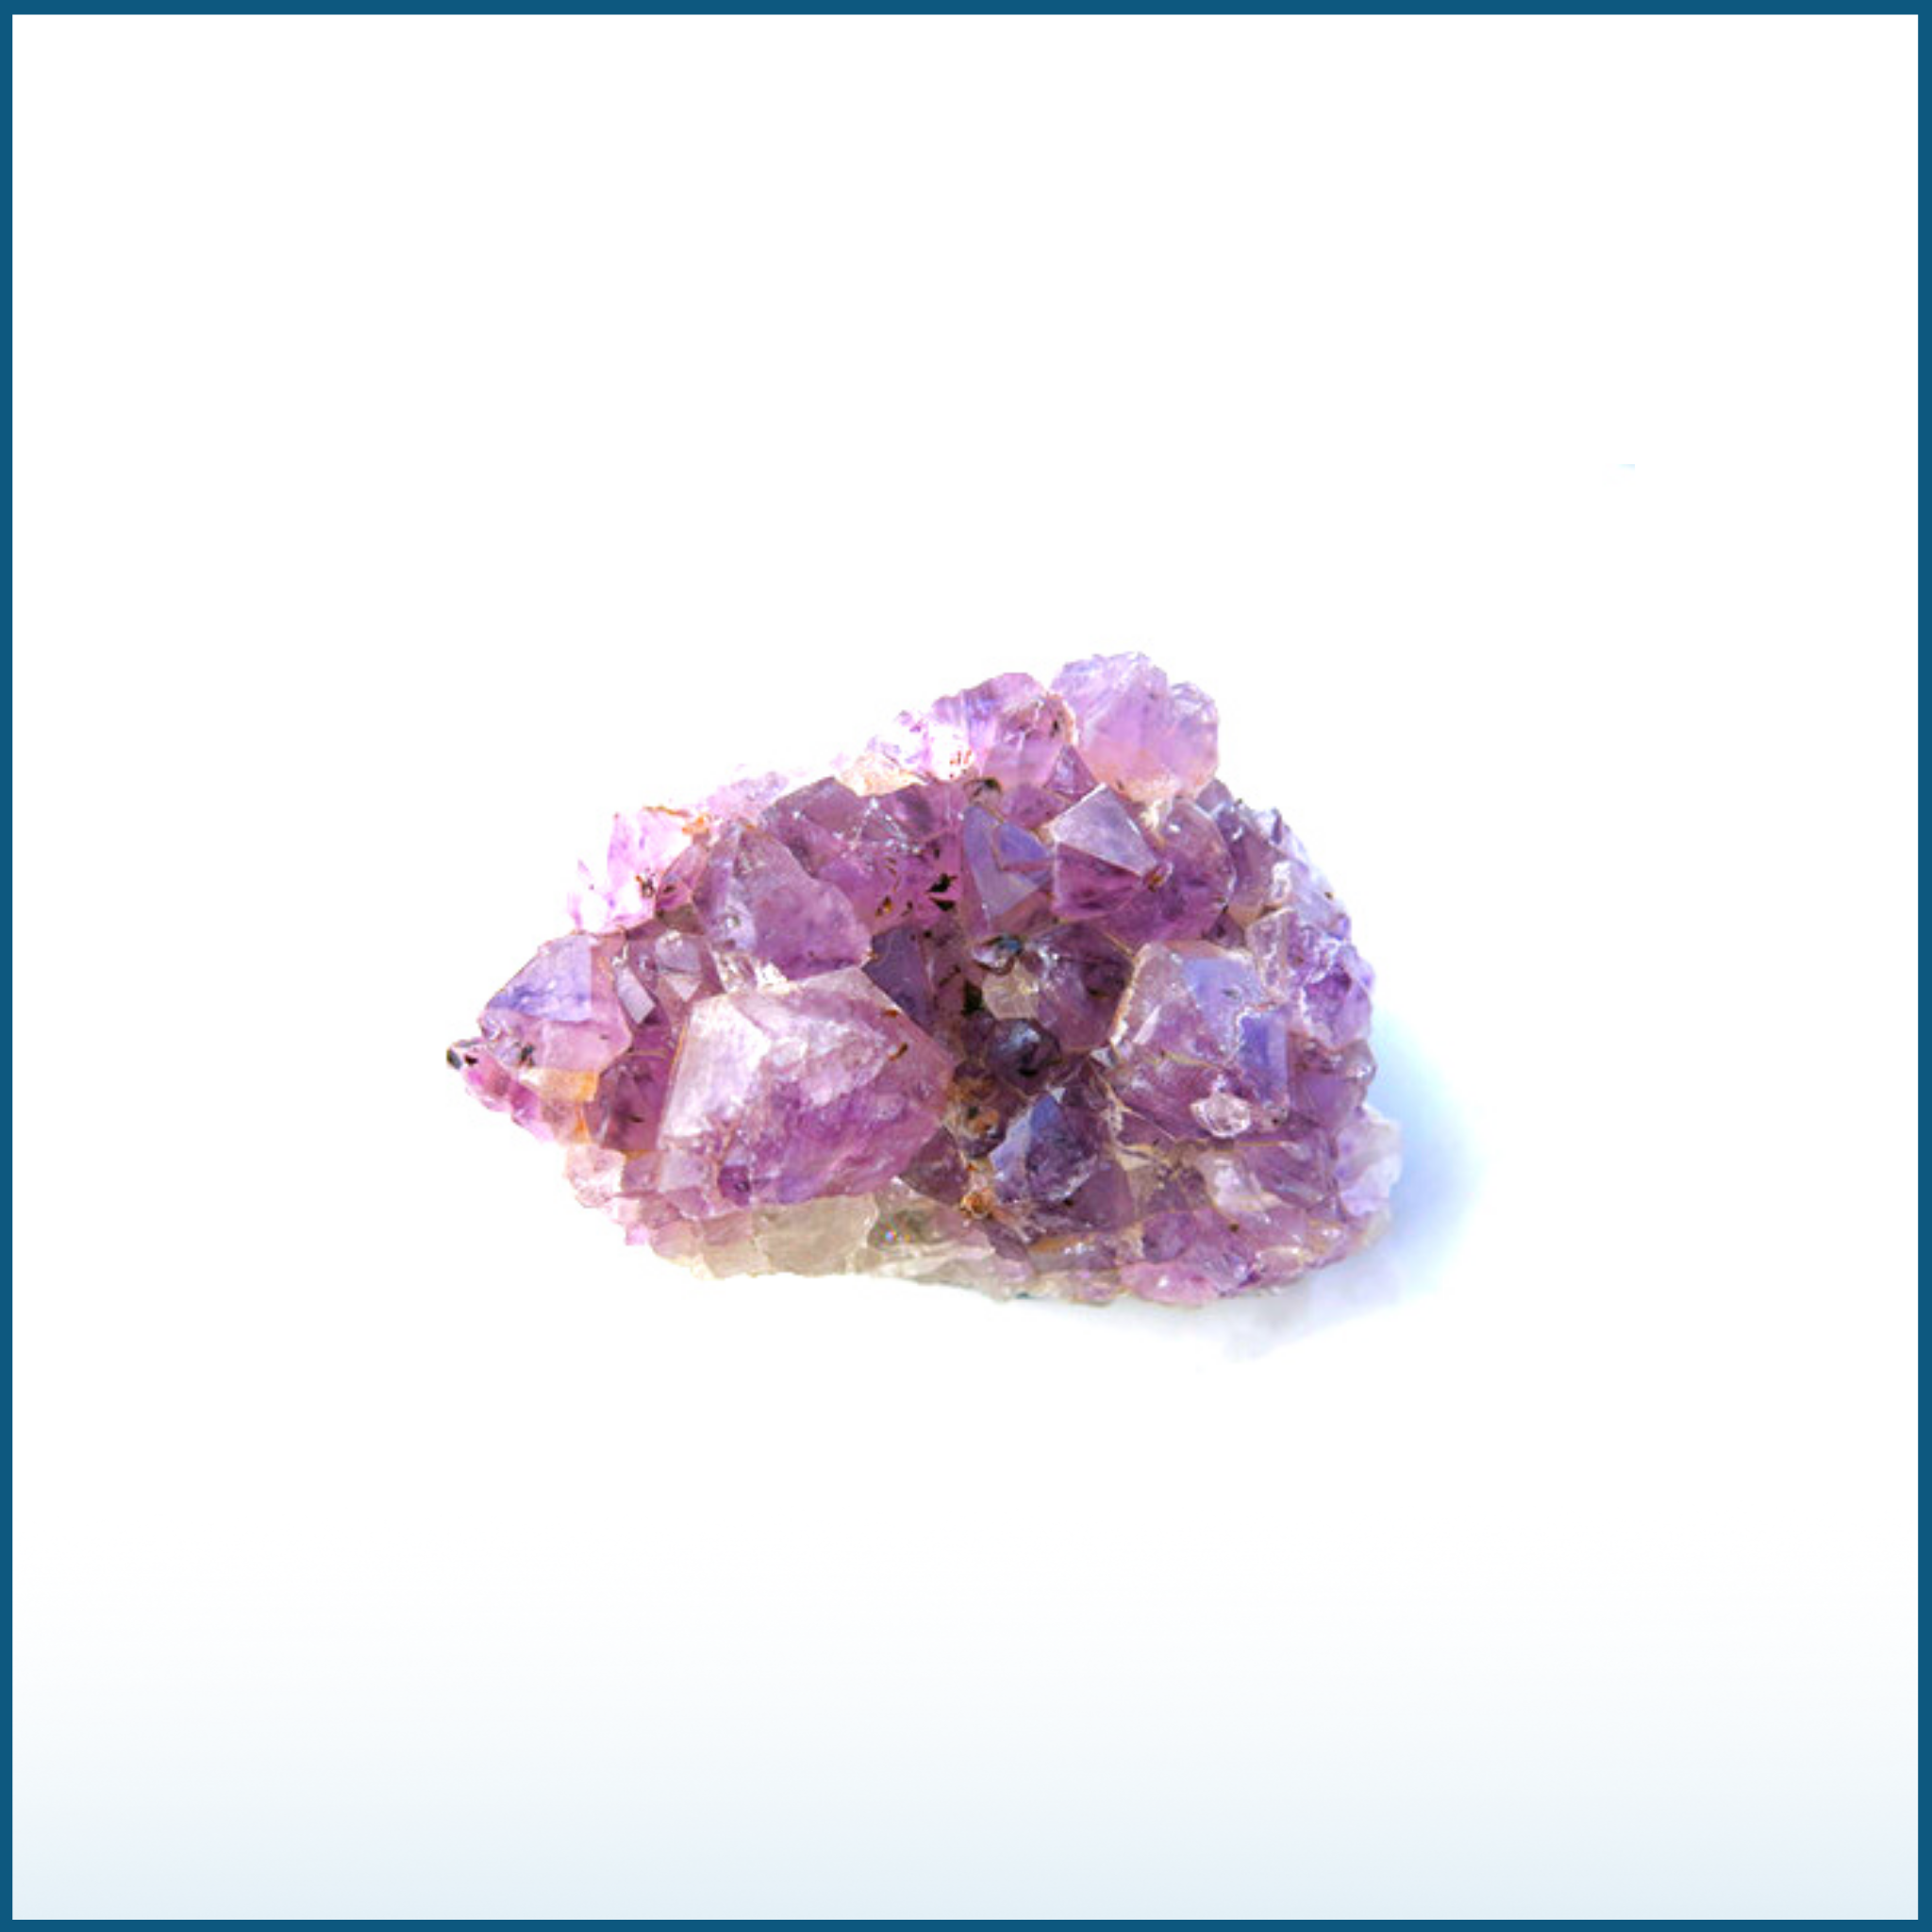 Enhance Your Space with Stunning Amethyst Clusters - Natural Healing Crystals for Positive Energy and Décor-12